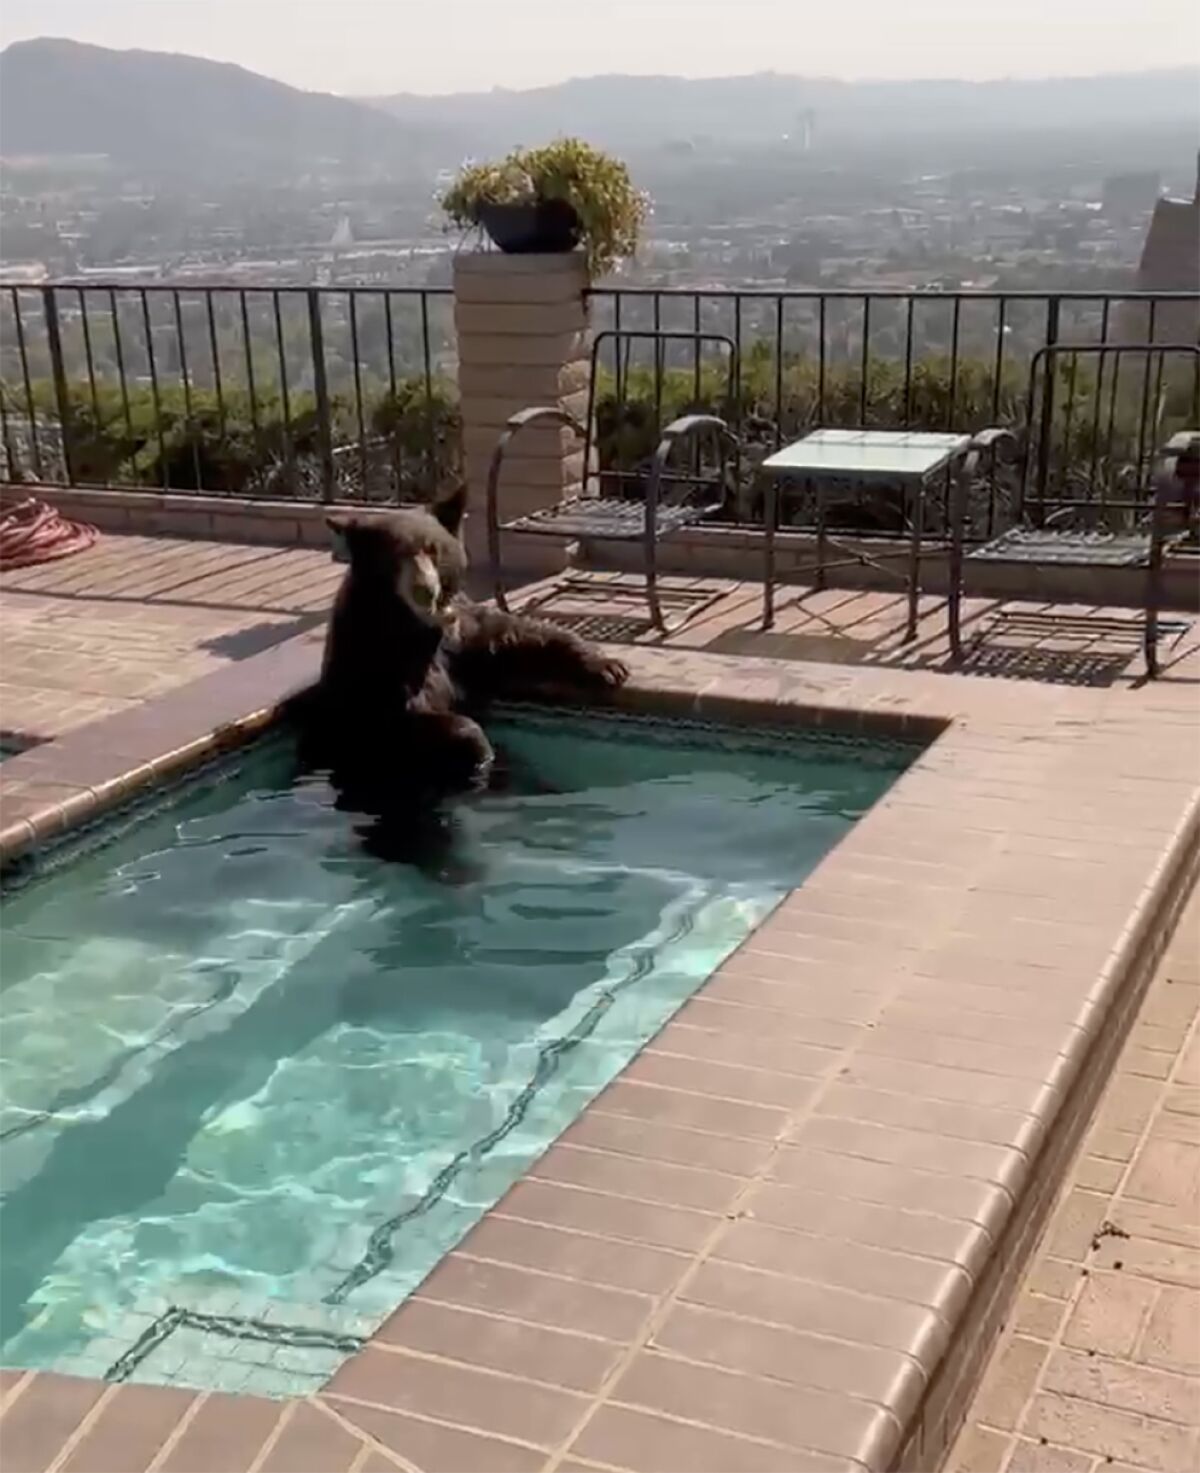 A bear hanging out in a hot tub in Burbank.